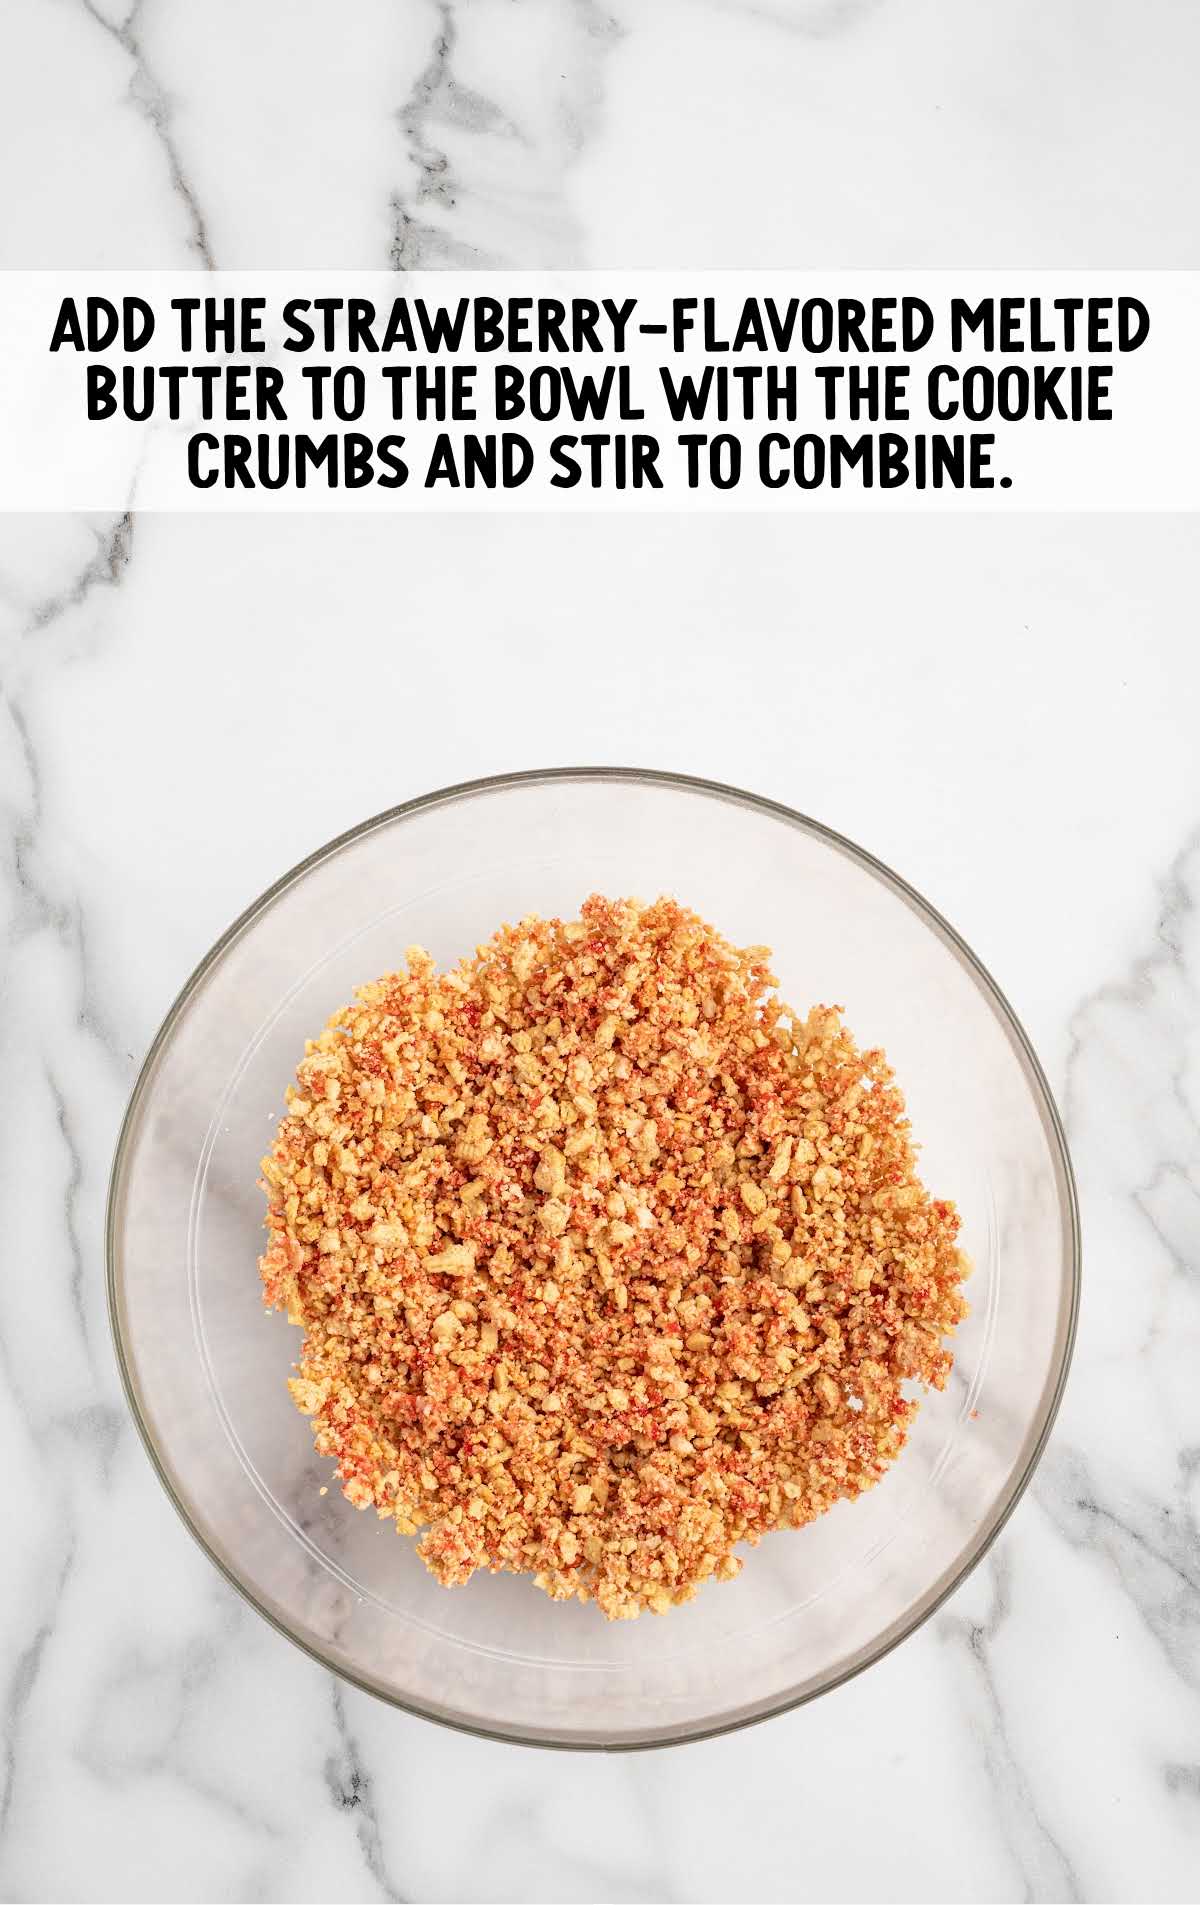 strawberry flavored melted butter added to the bowl with the cookie crumbs